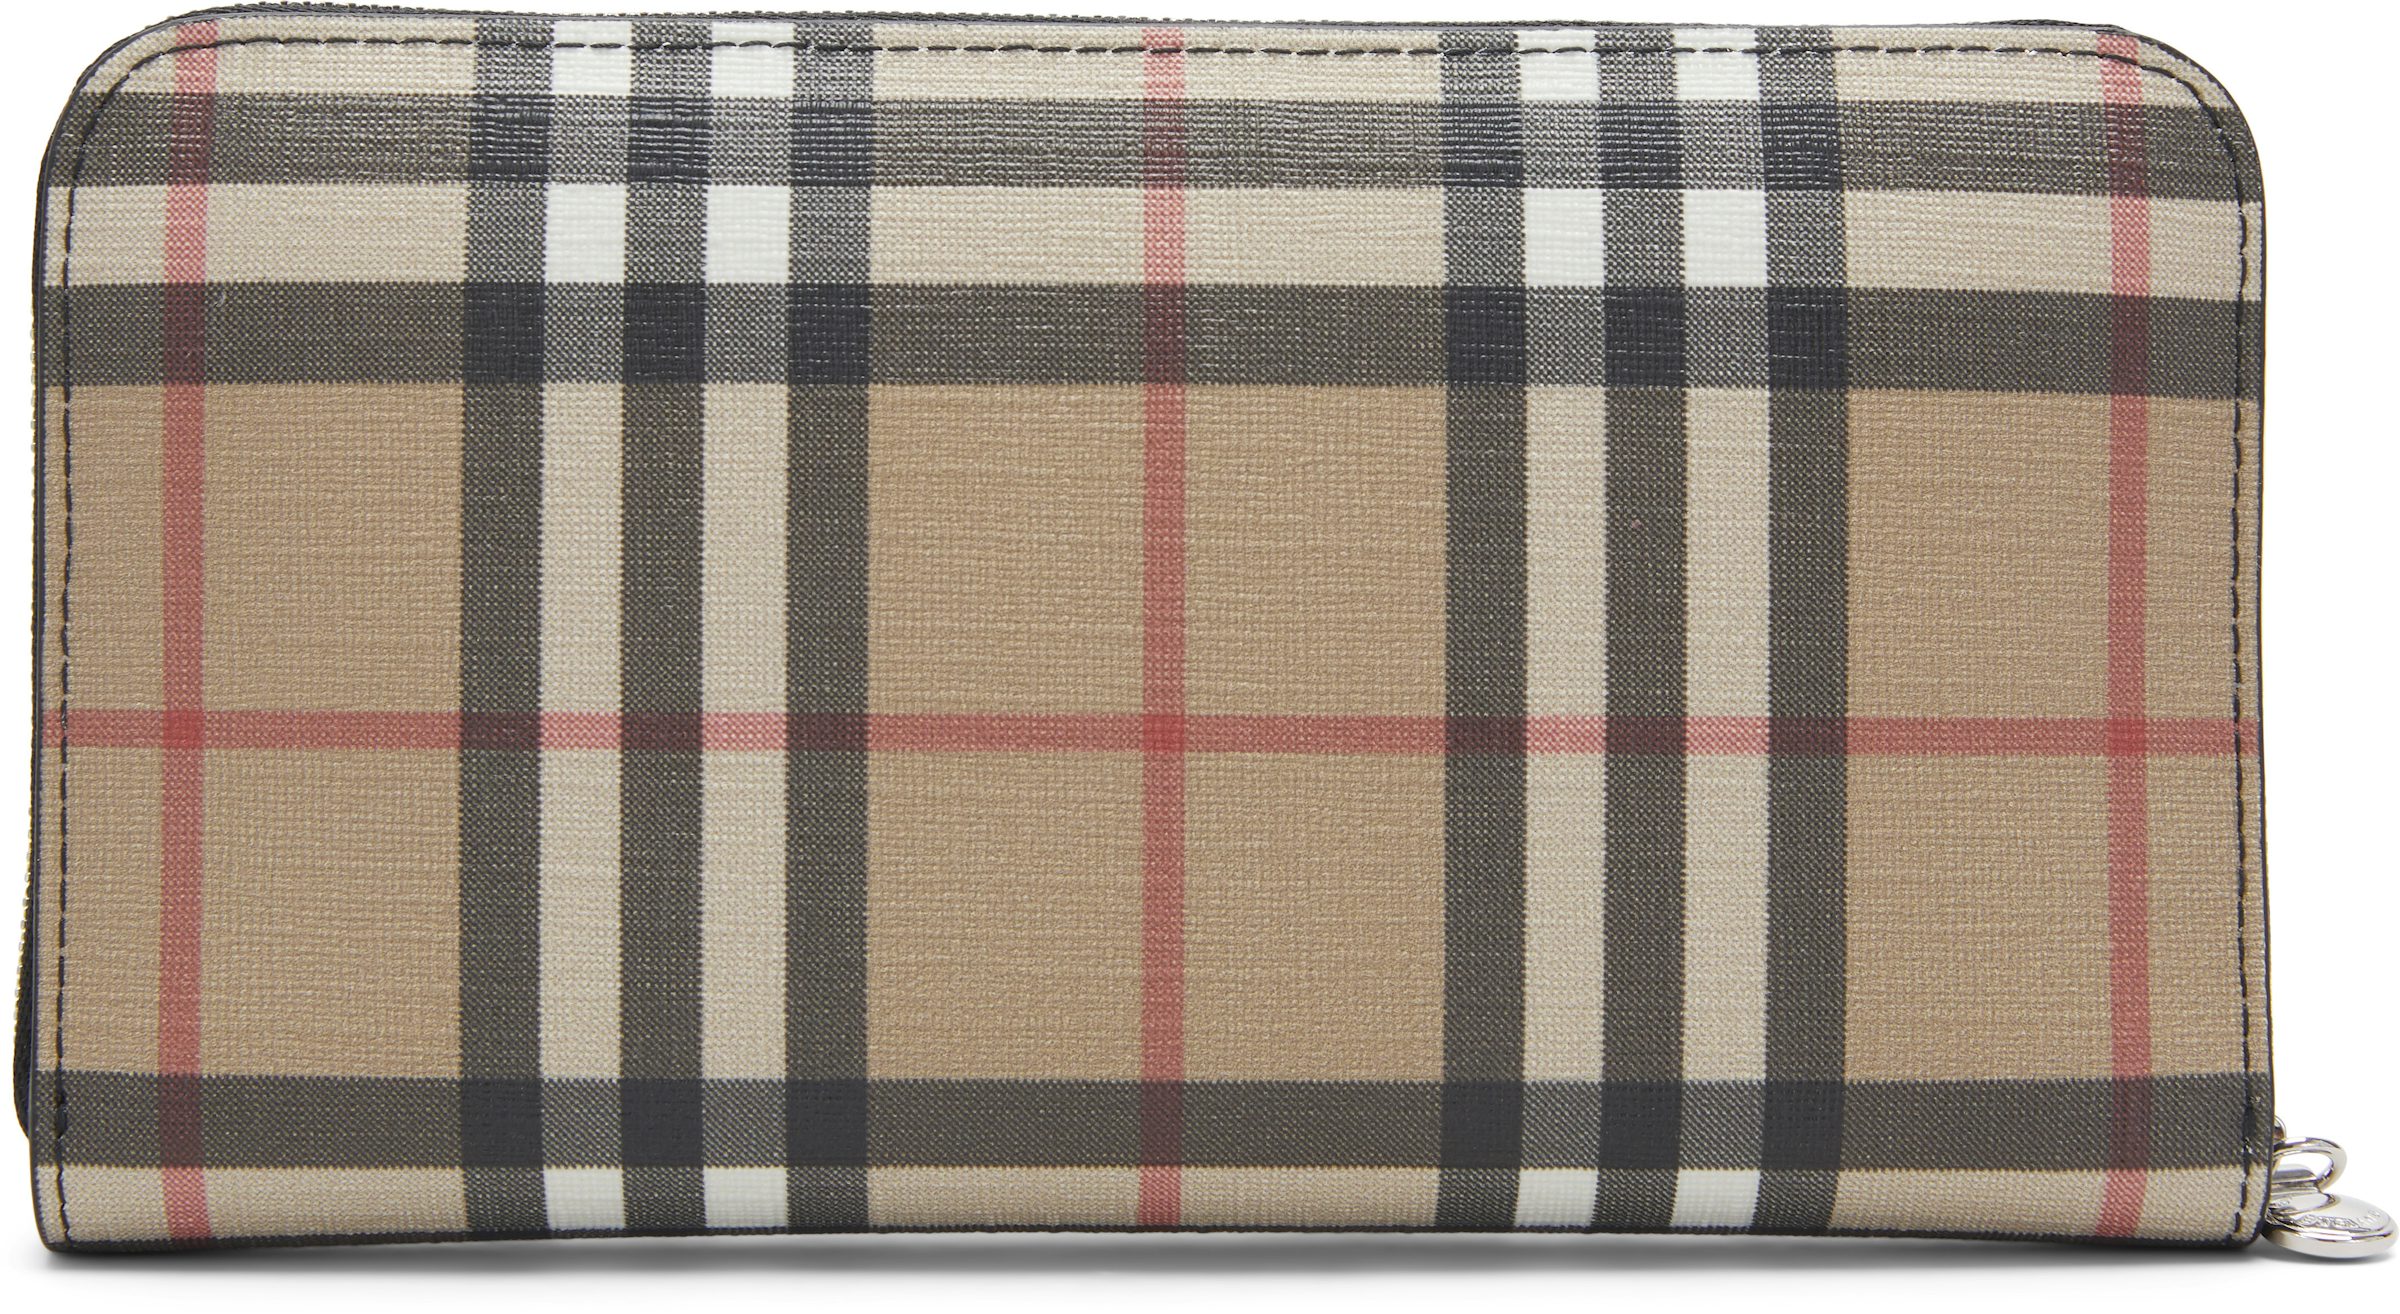 Check Small Folding Wallet in Archive Beige - Women | Burberry® Official